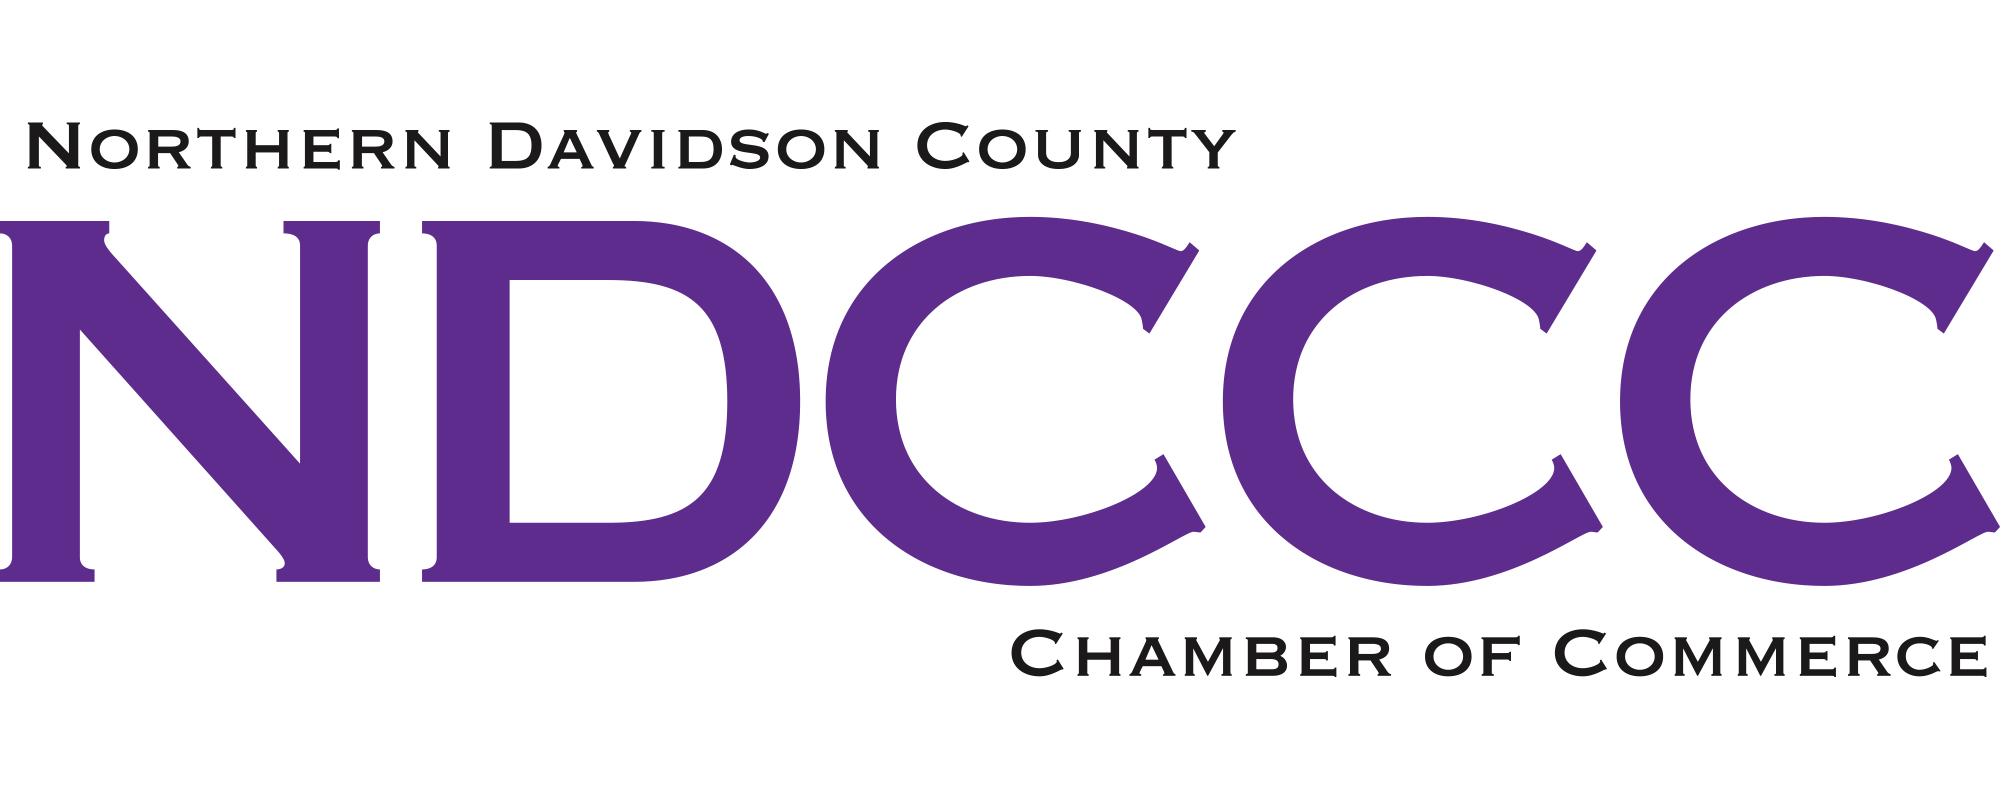 Northern Davidson County Chamber of Commerce